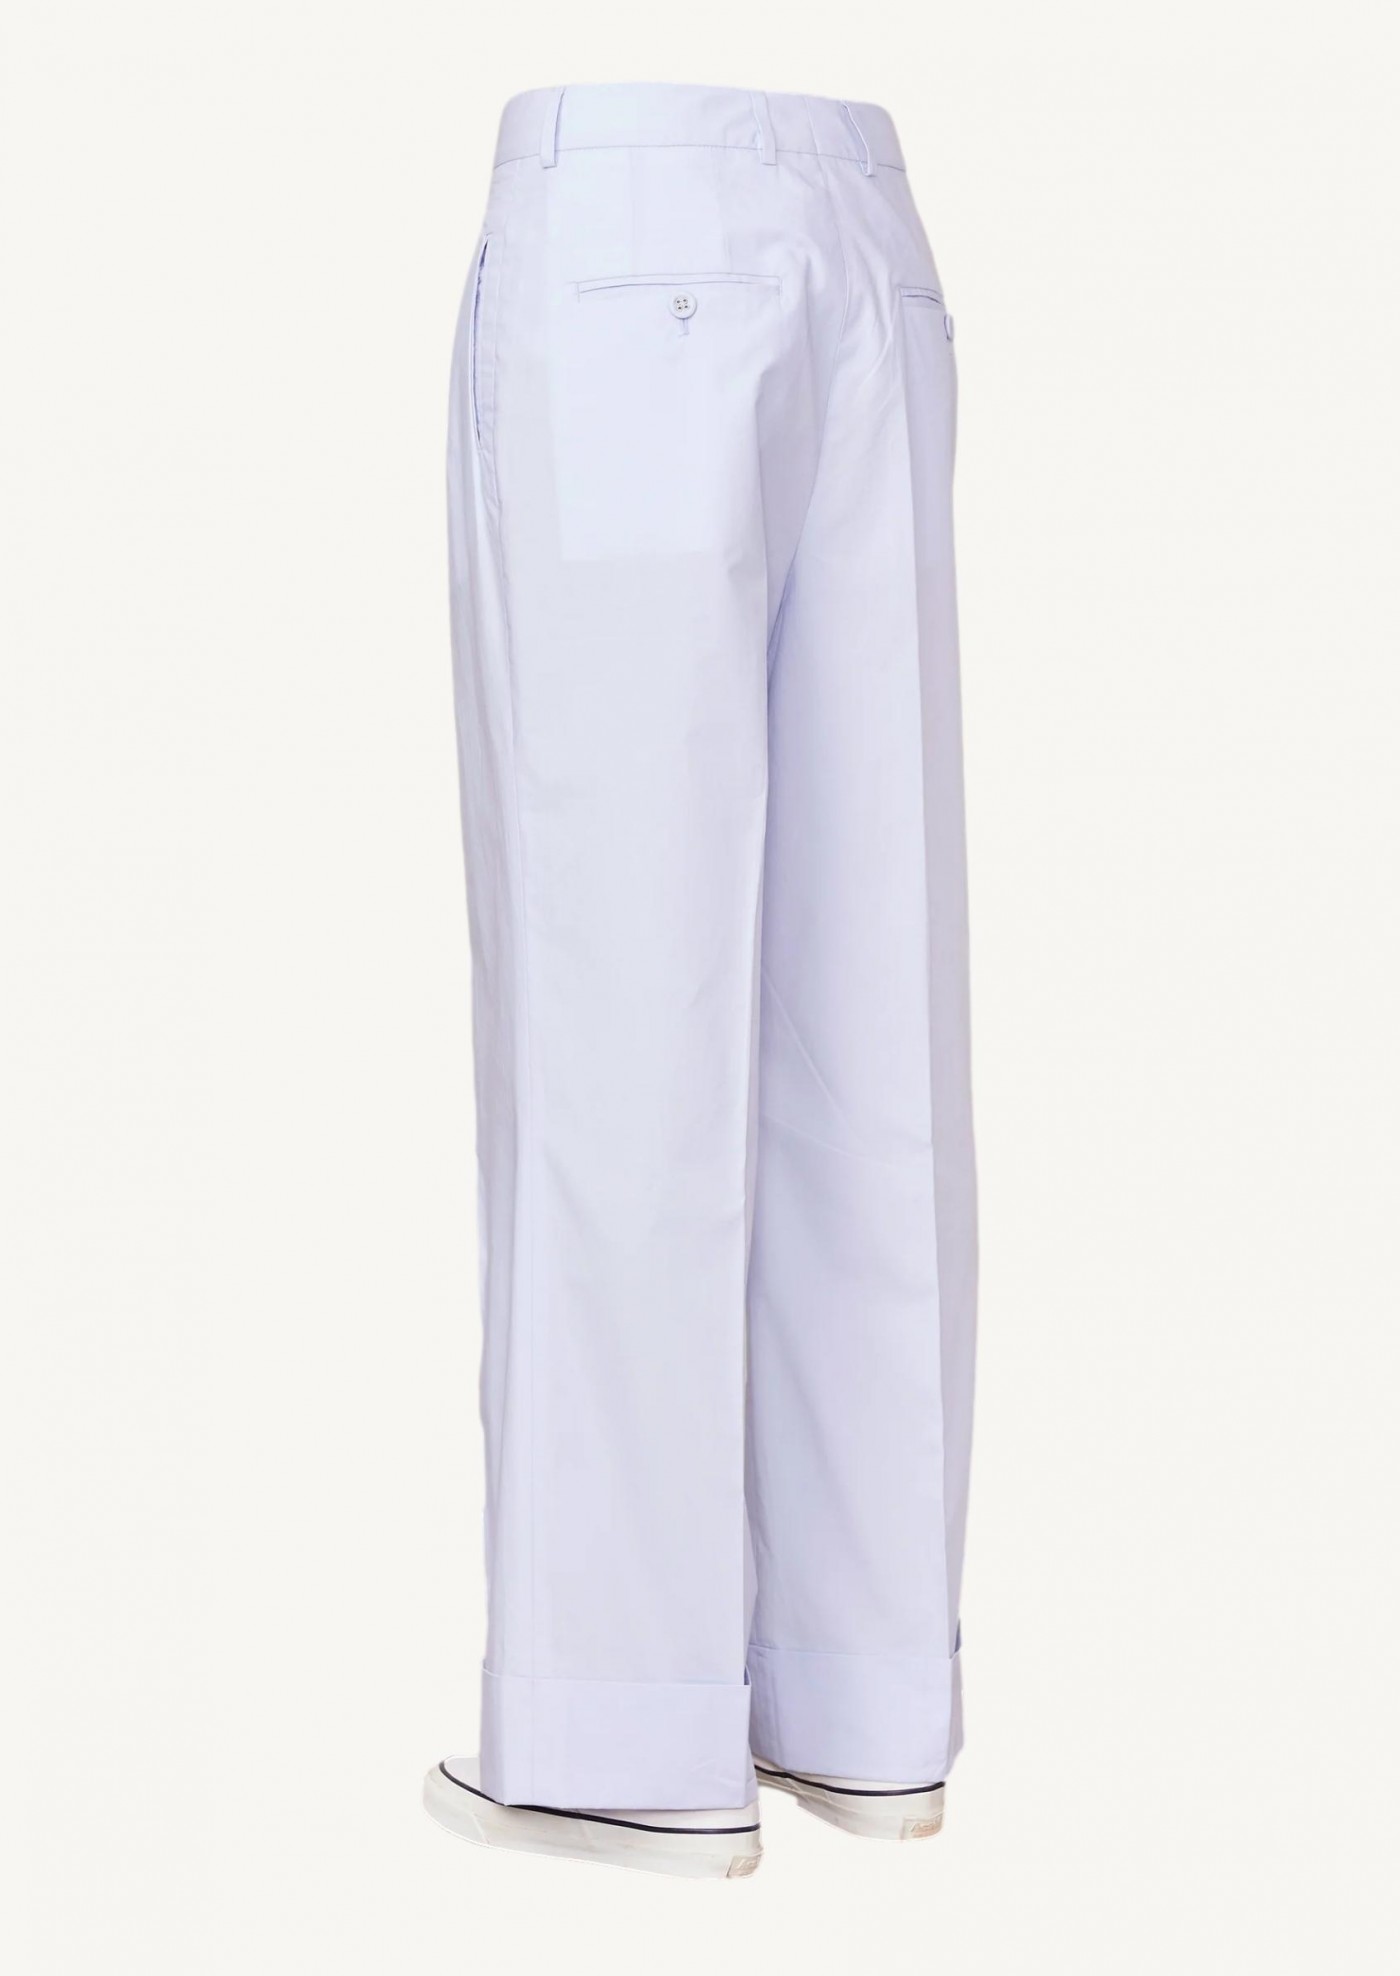 Willow blue cloudy trousers